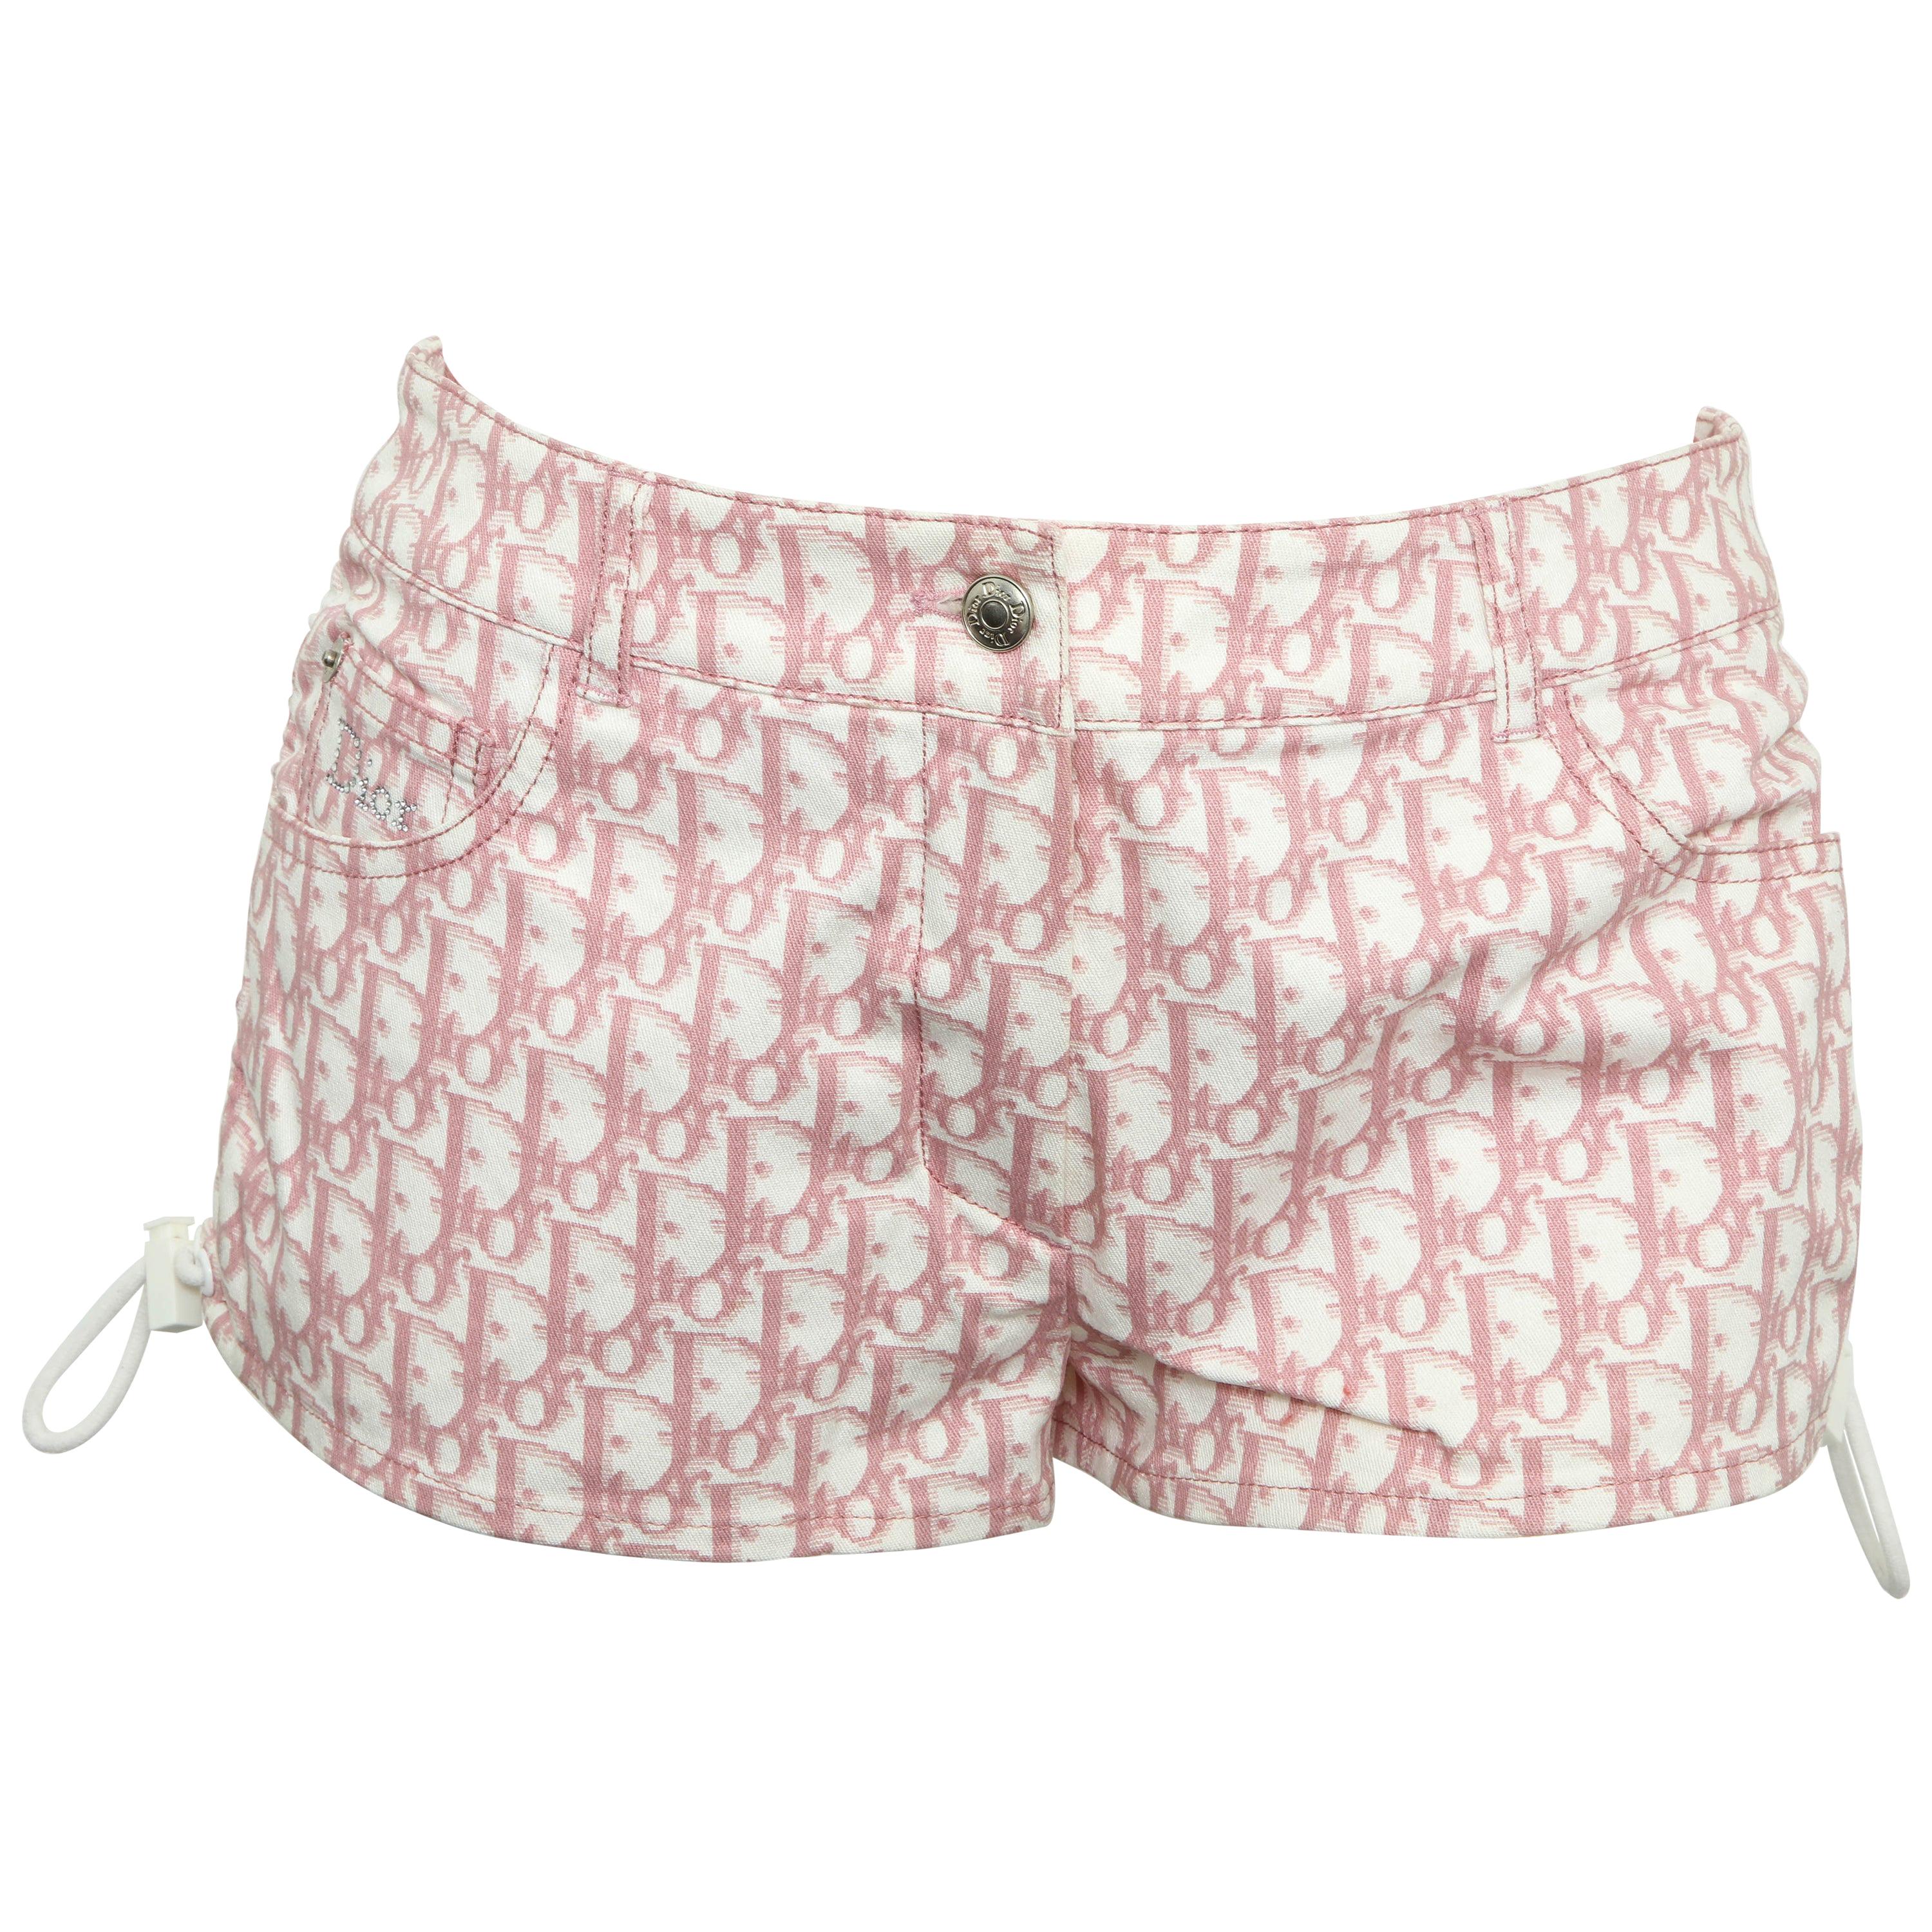 John Galliano for Christian Dior Pink Trotter Logo shorts For Sale